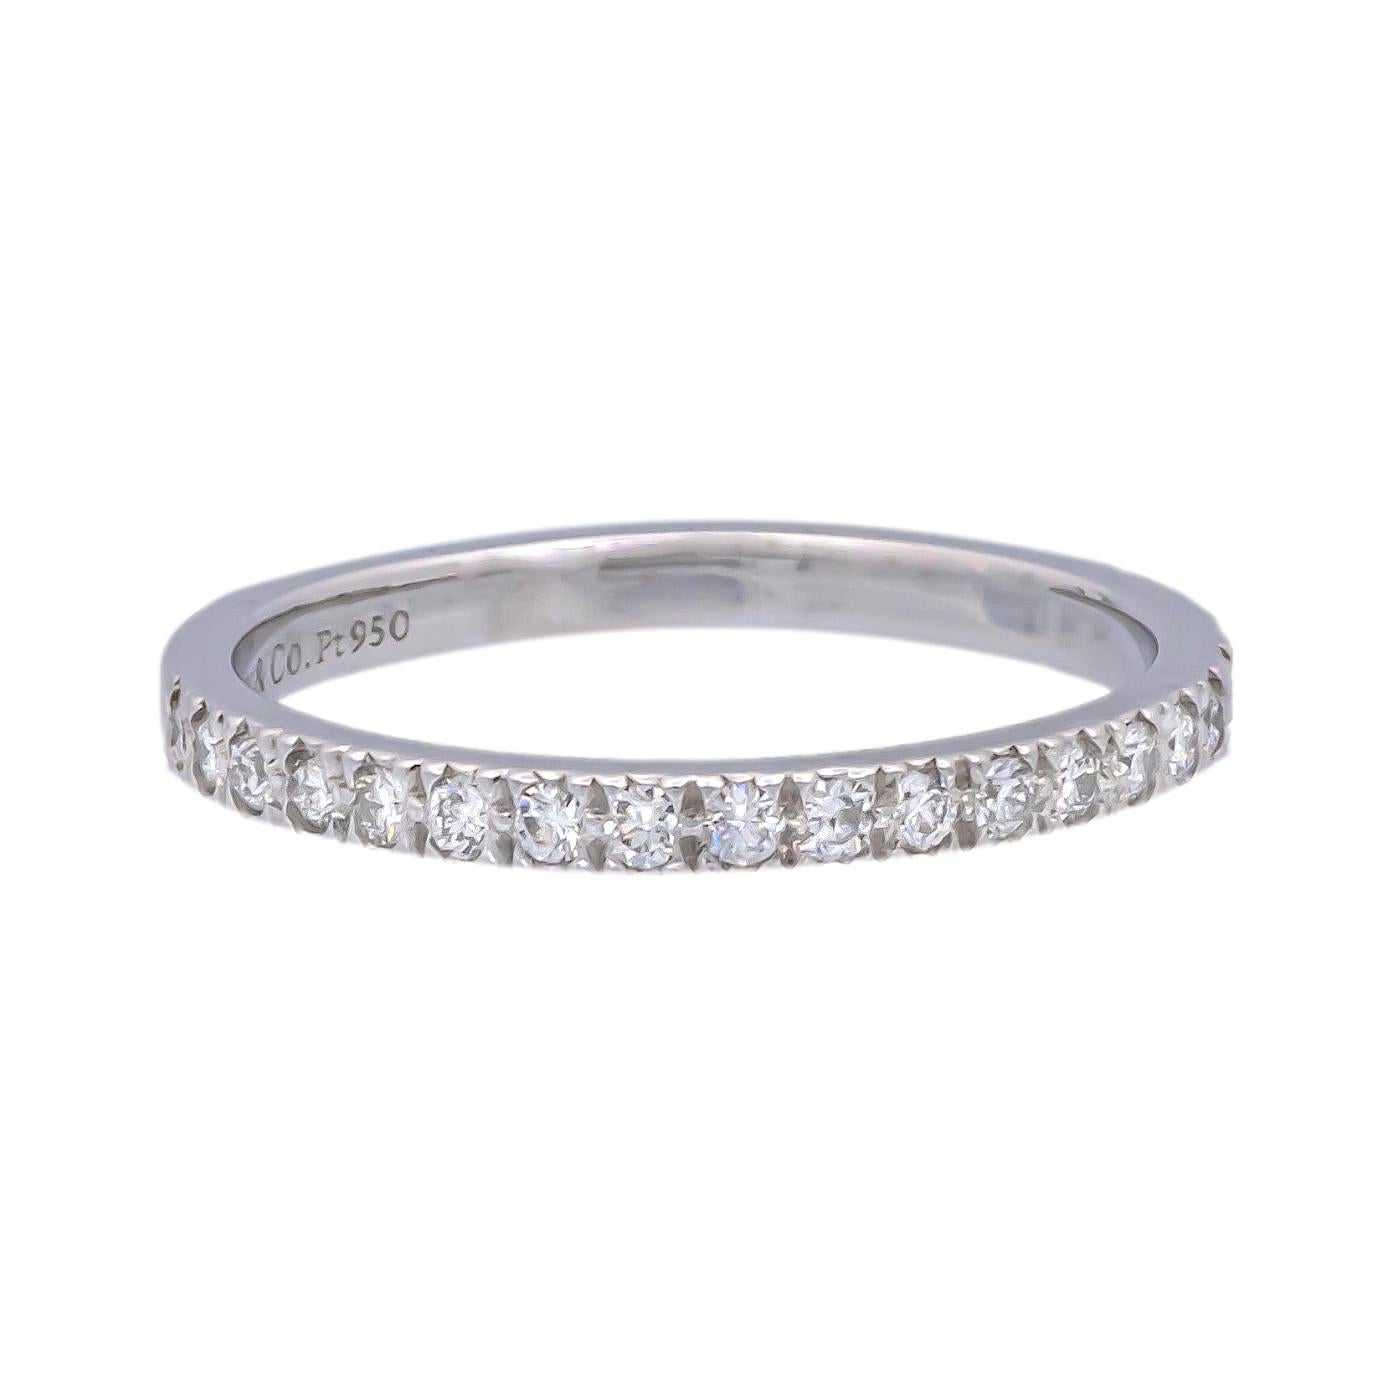 Tiffany & Co. Band ring from the Novo collection finely crafted in platinum featuring 18 round brilliant cut diamonds weighing 0.18 carats total weight approximately encrusted in bead setting going halfway around. Fully hallmarked with logo and